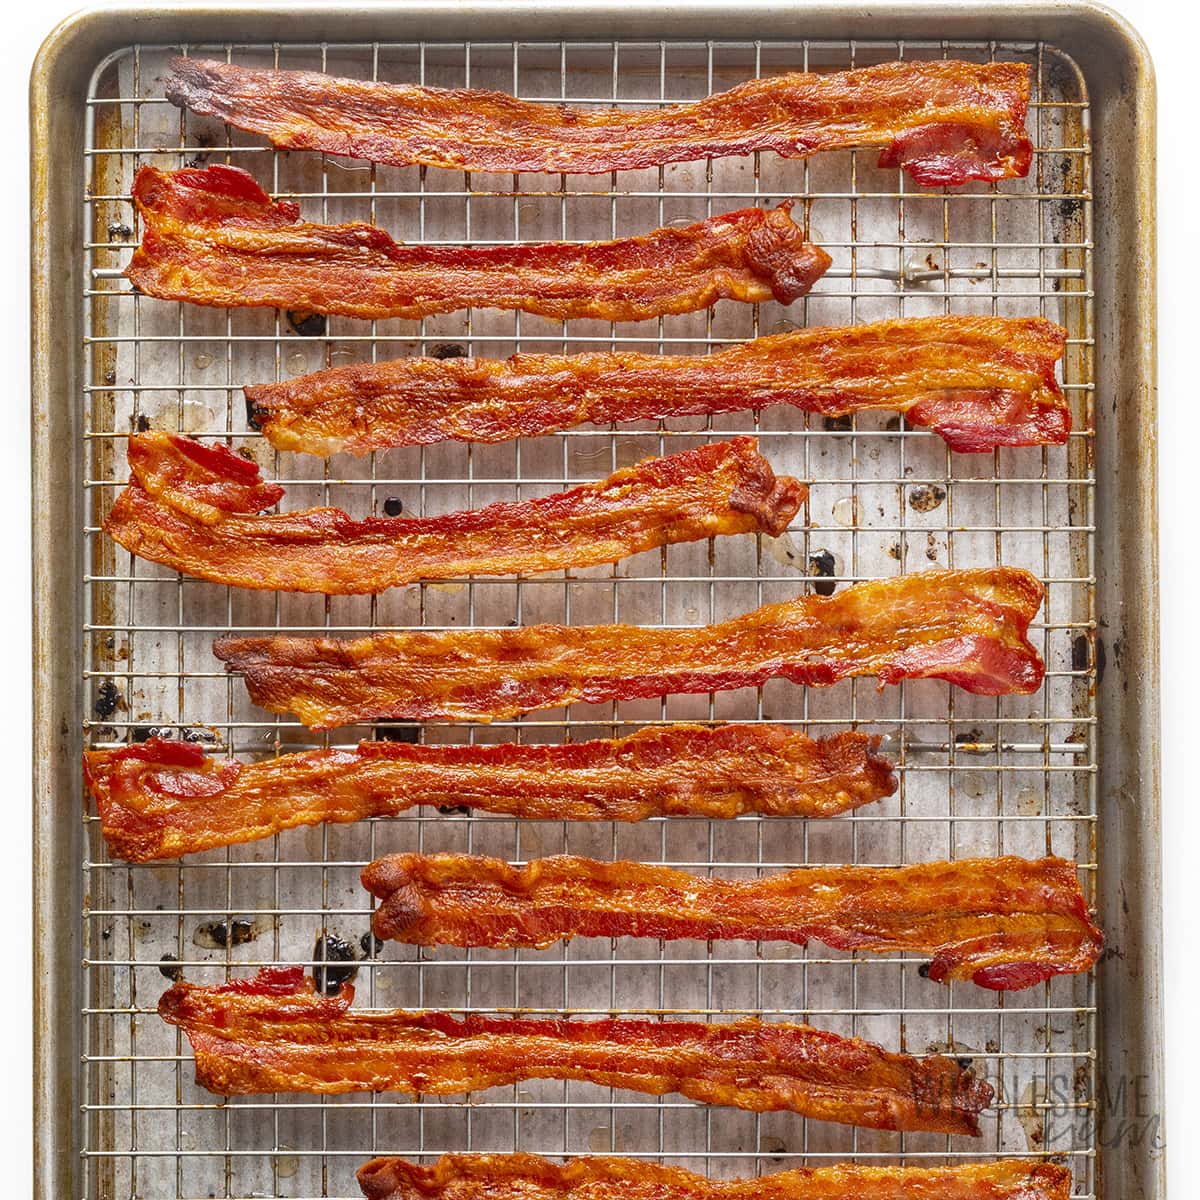 Bacon on a rack after baking in the oven